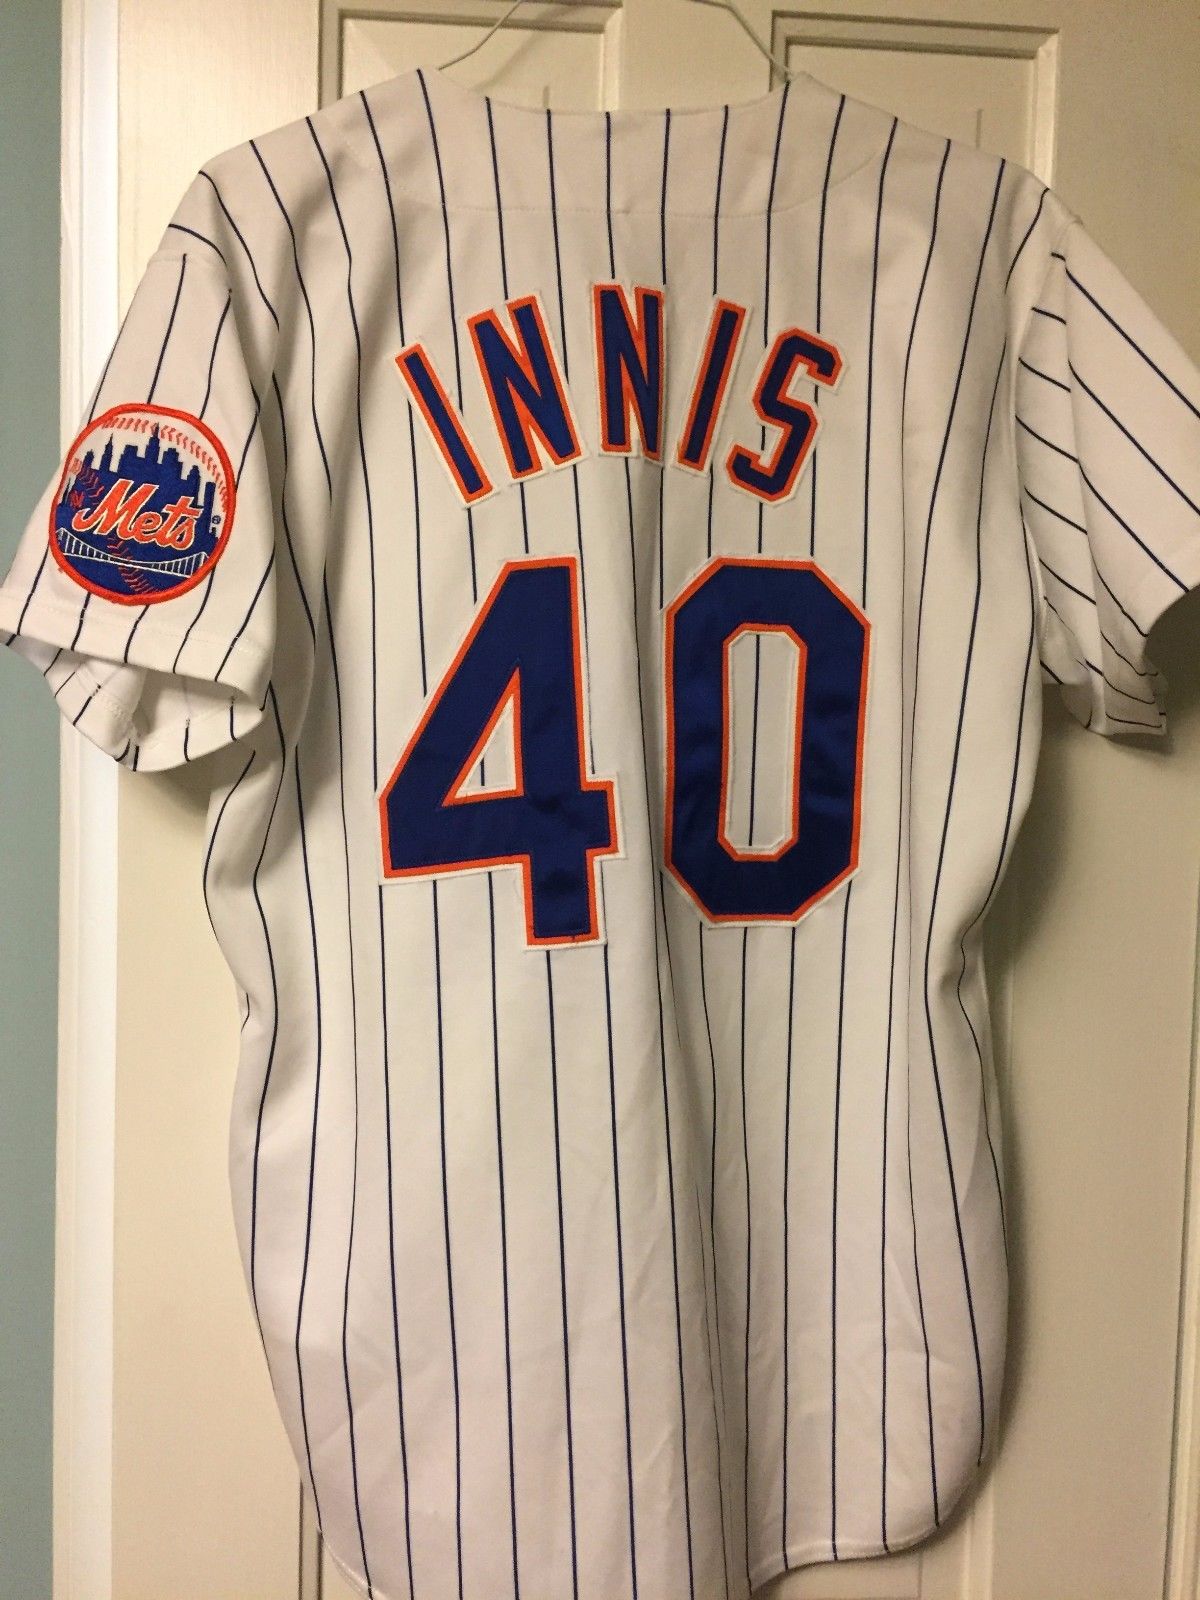 Mail day, Grail day! Game used 1993 Jeff innis Mets jersey! : r